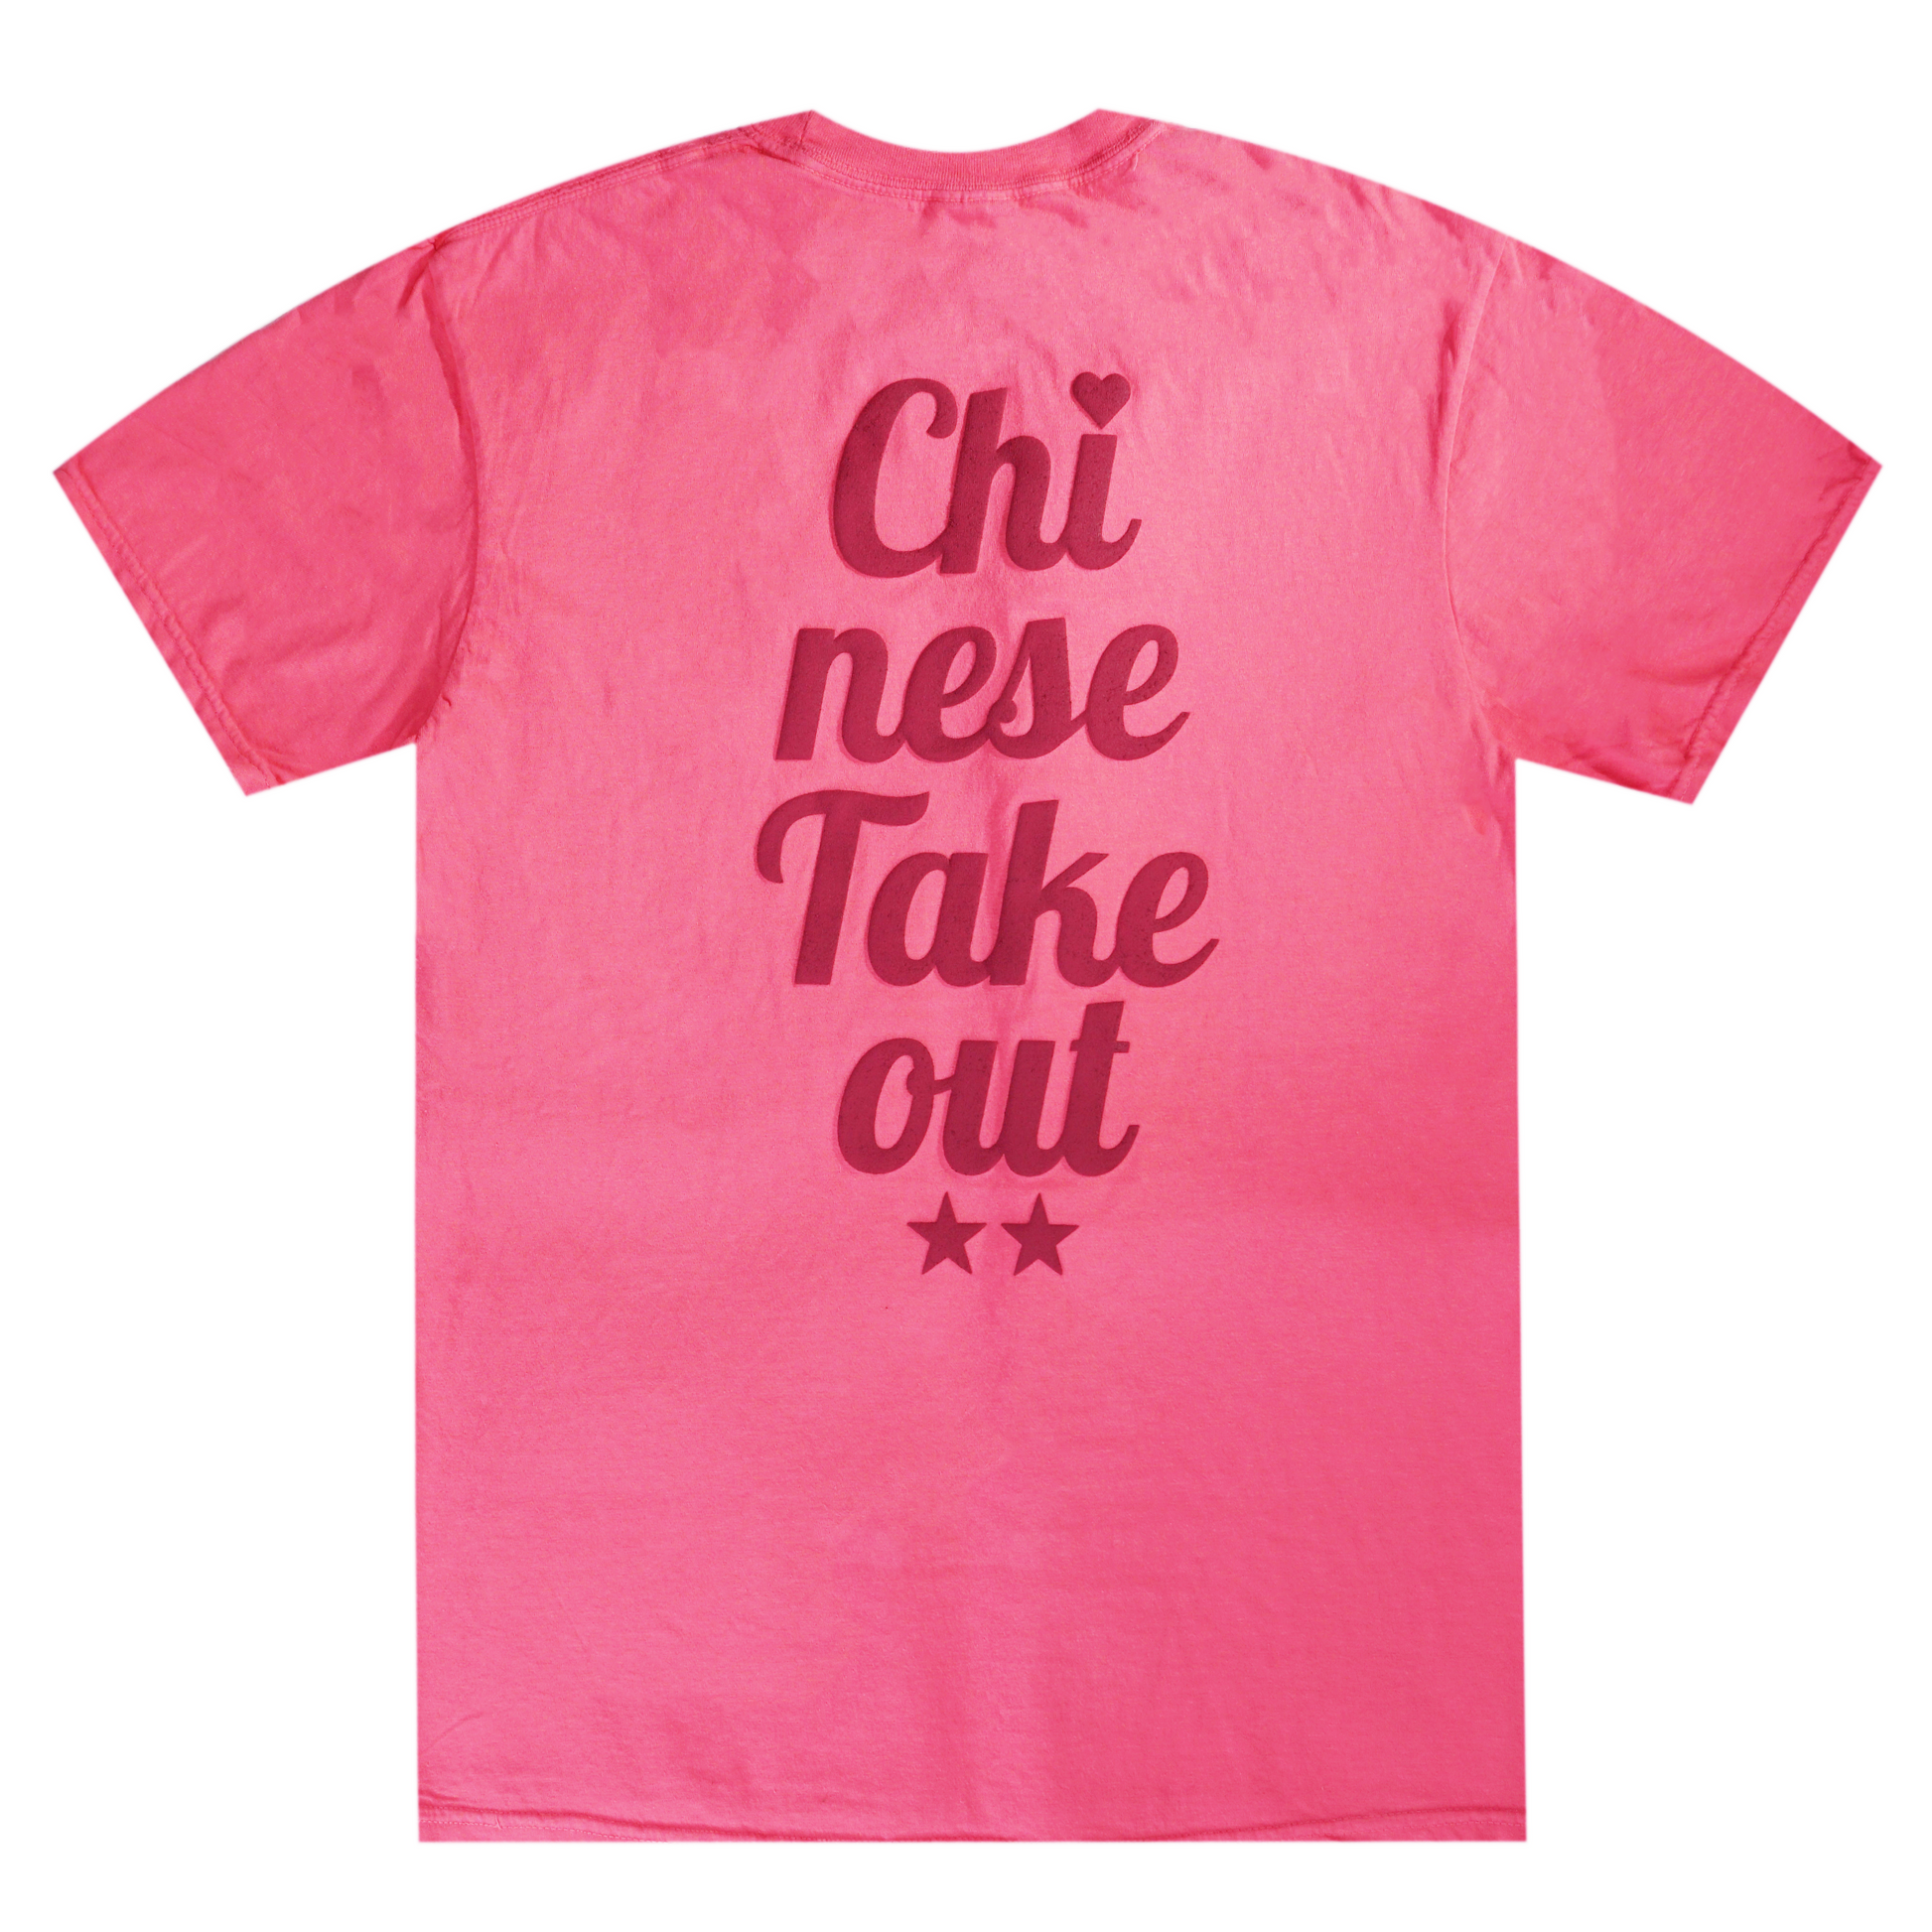 CTO,Pink Tee, Takeout, Men Tee, Boys Tee, Teen Tee, Valentines Day Apparel, Shirt to Match Valentines Day Dunks, WMNS, Graphic Tee, Urban Apparel,